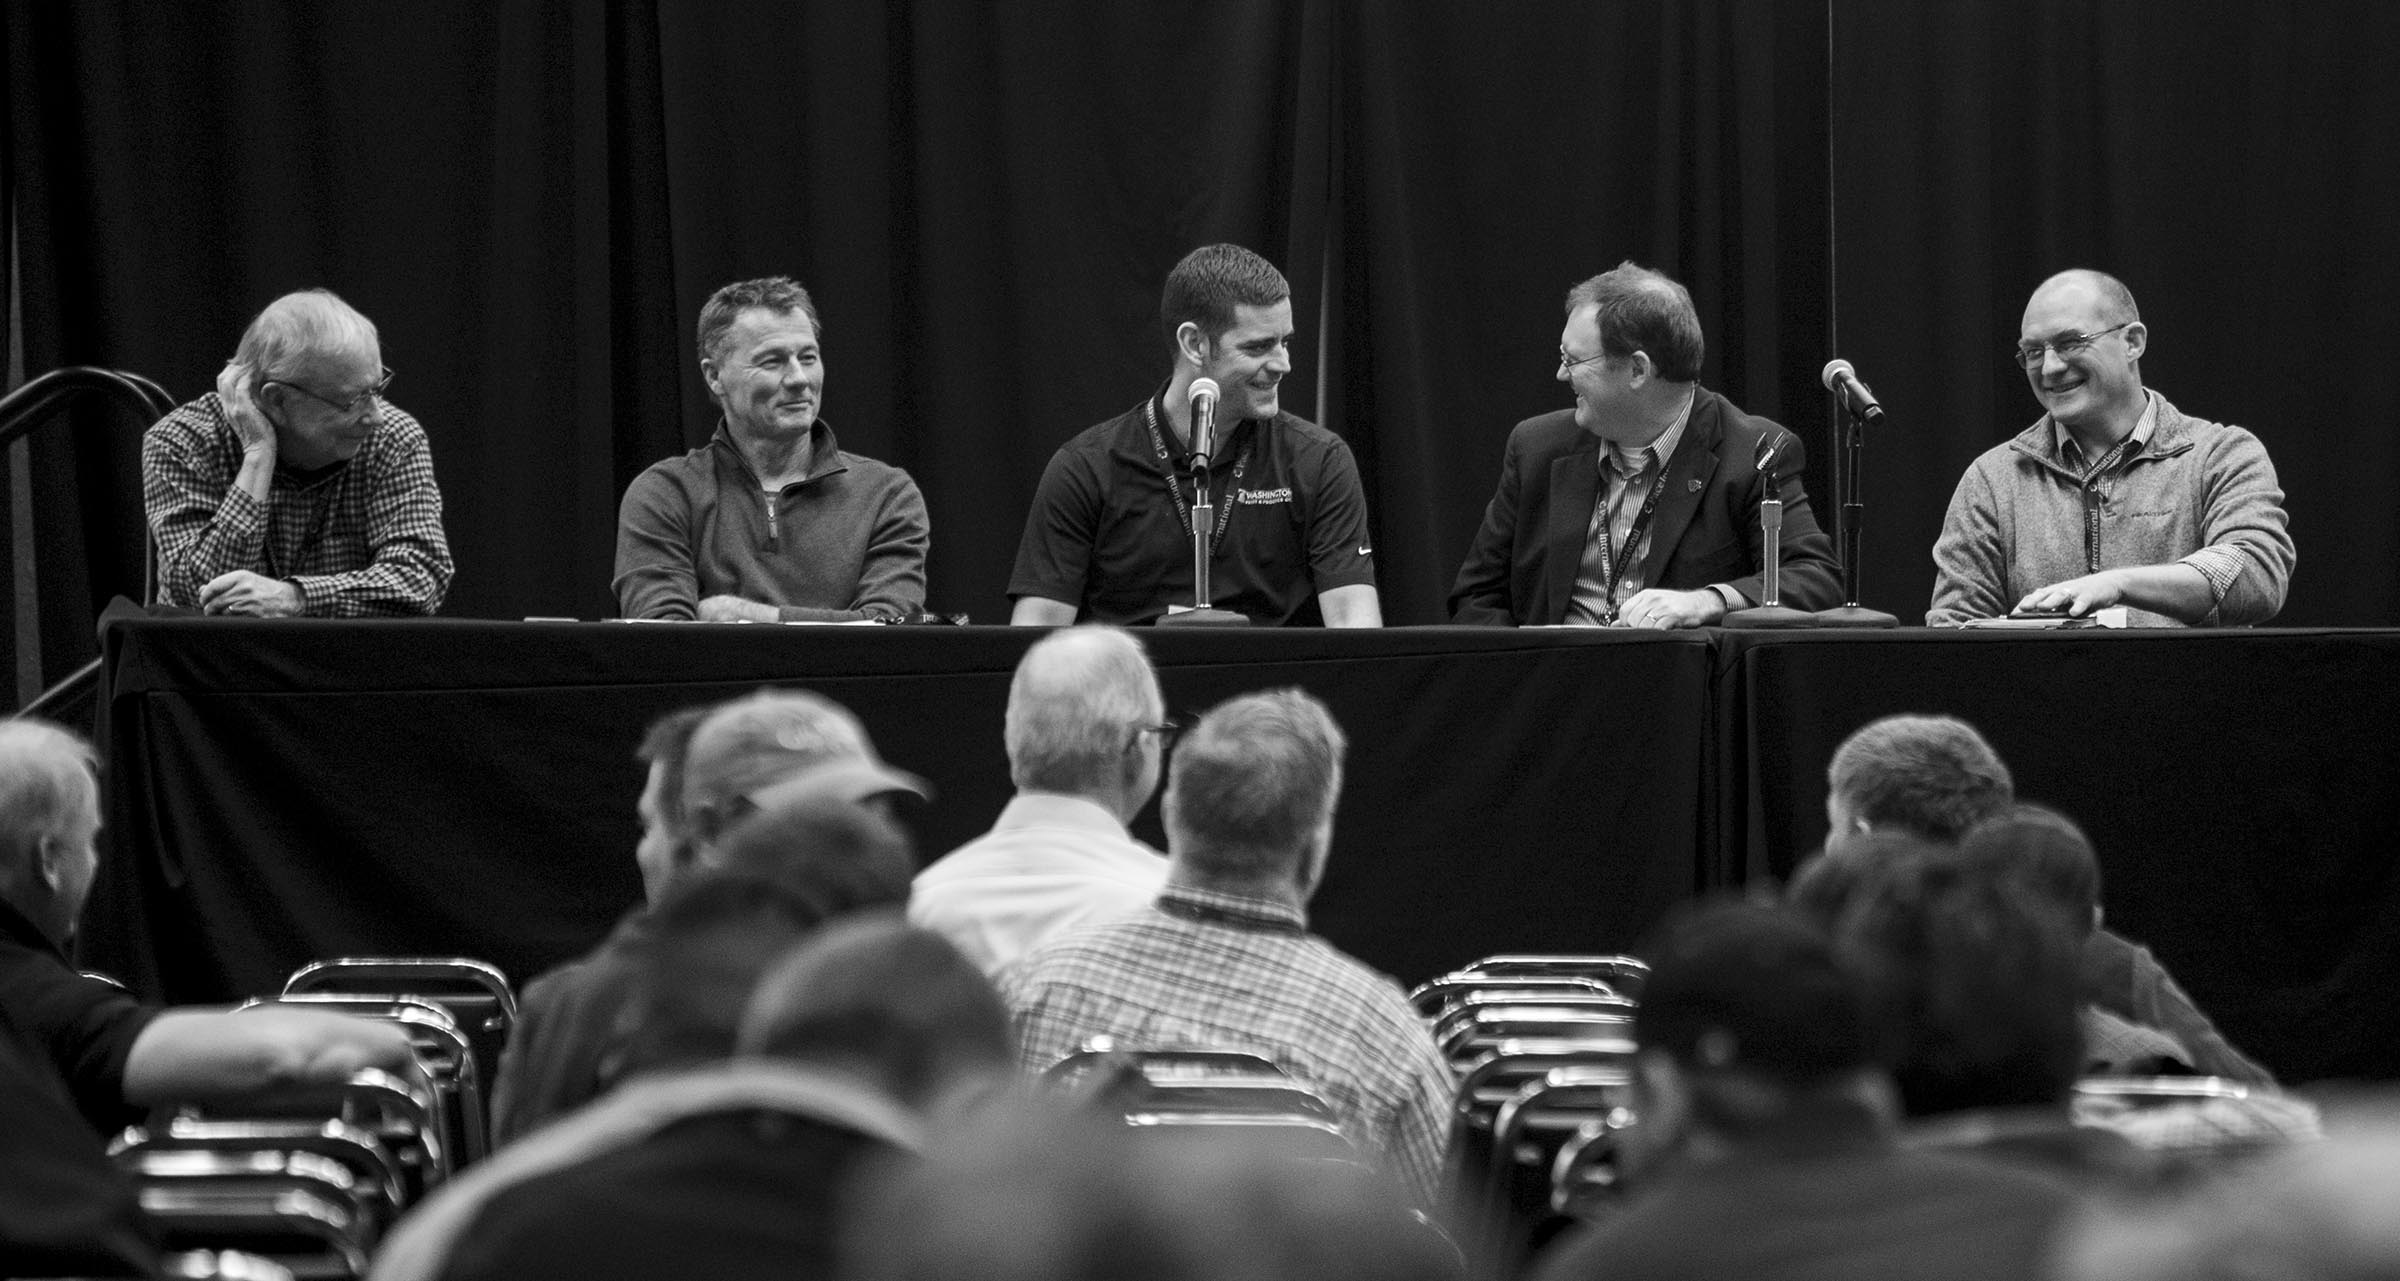 The final day two panel covering harvest management shares a laugh at the conclusion of their talk during the Washington State Tree Fruit Association's annual meeting on Tuesday, December 4, 2018, at the Yakima Convention Center in Yakima, Washington. (TJ Mullinax/Good Fruit Grower)